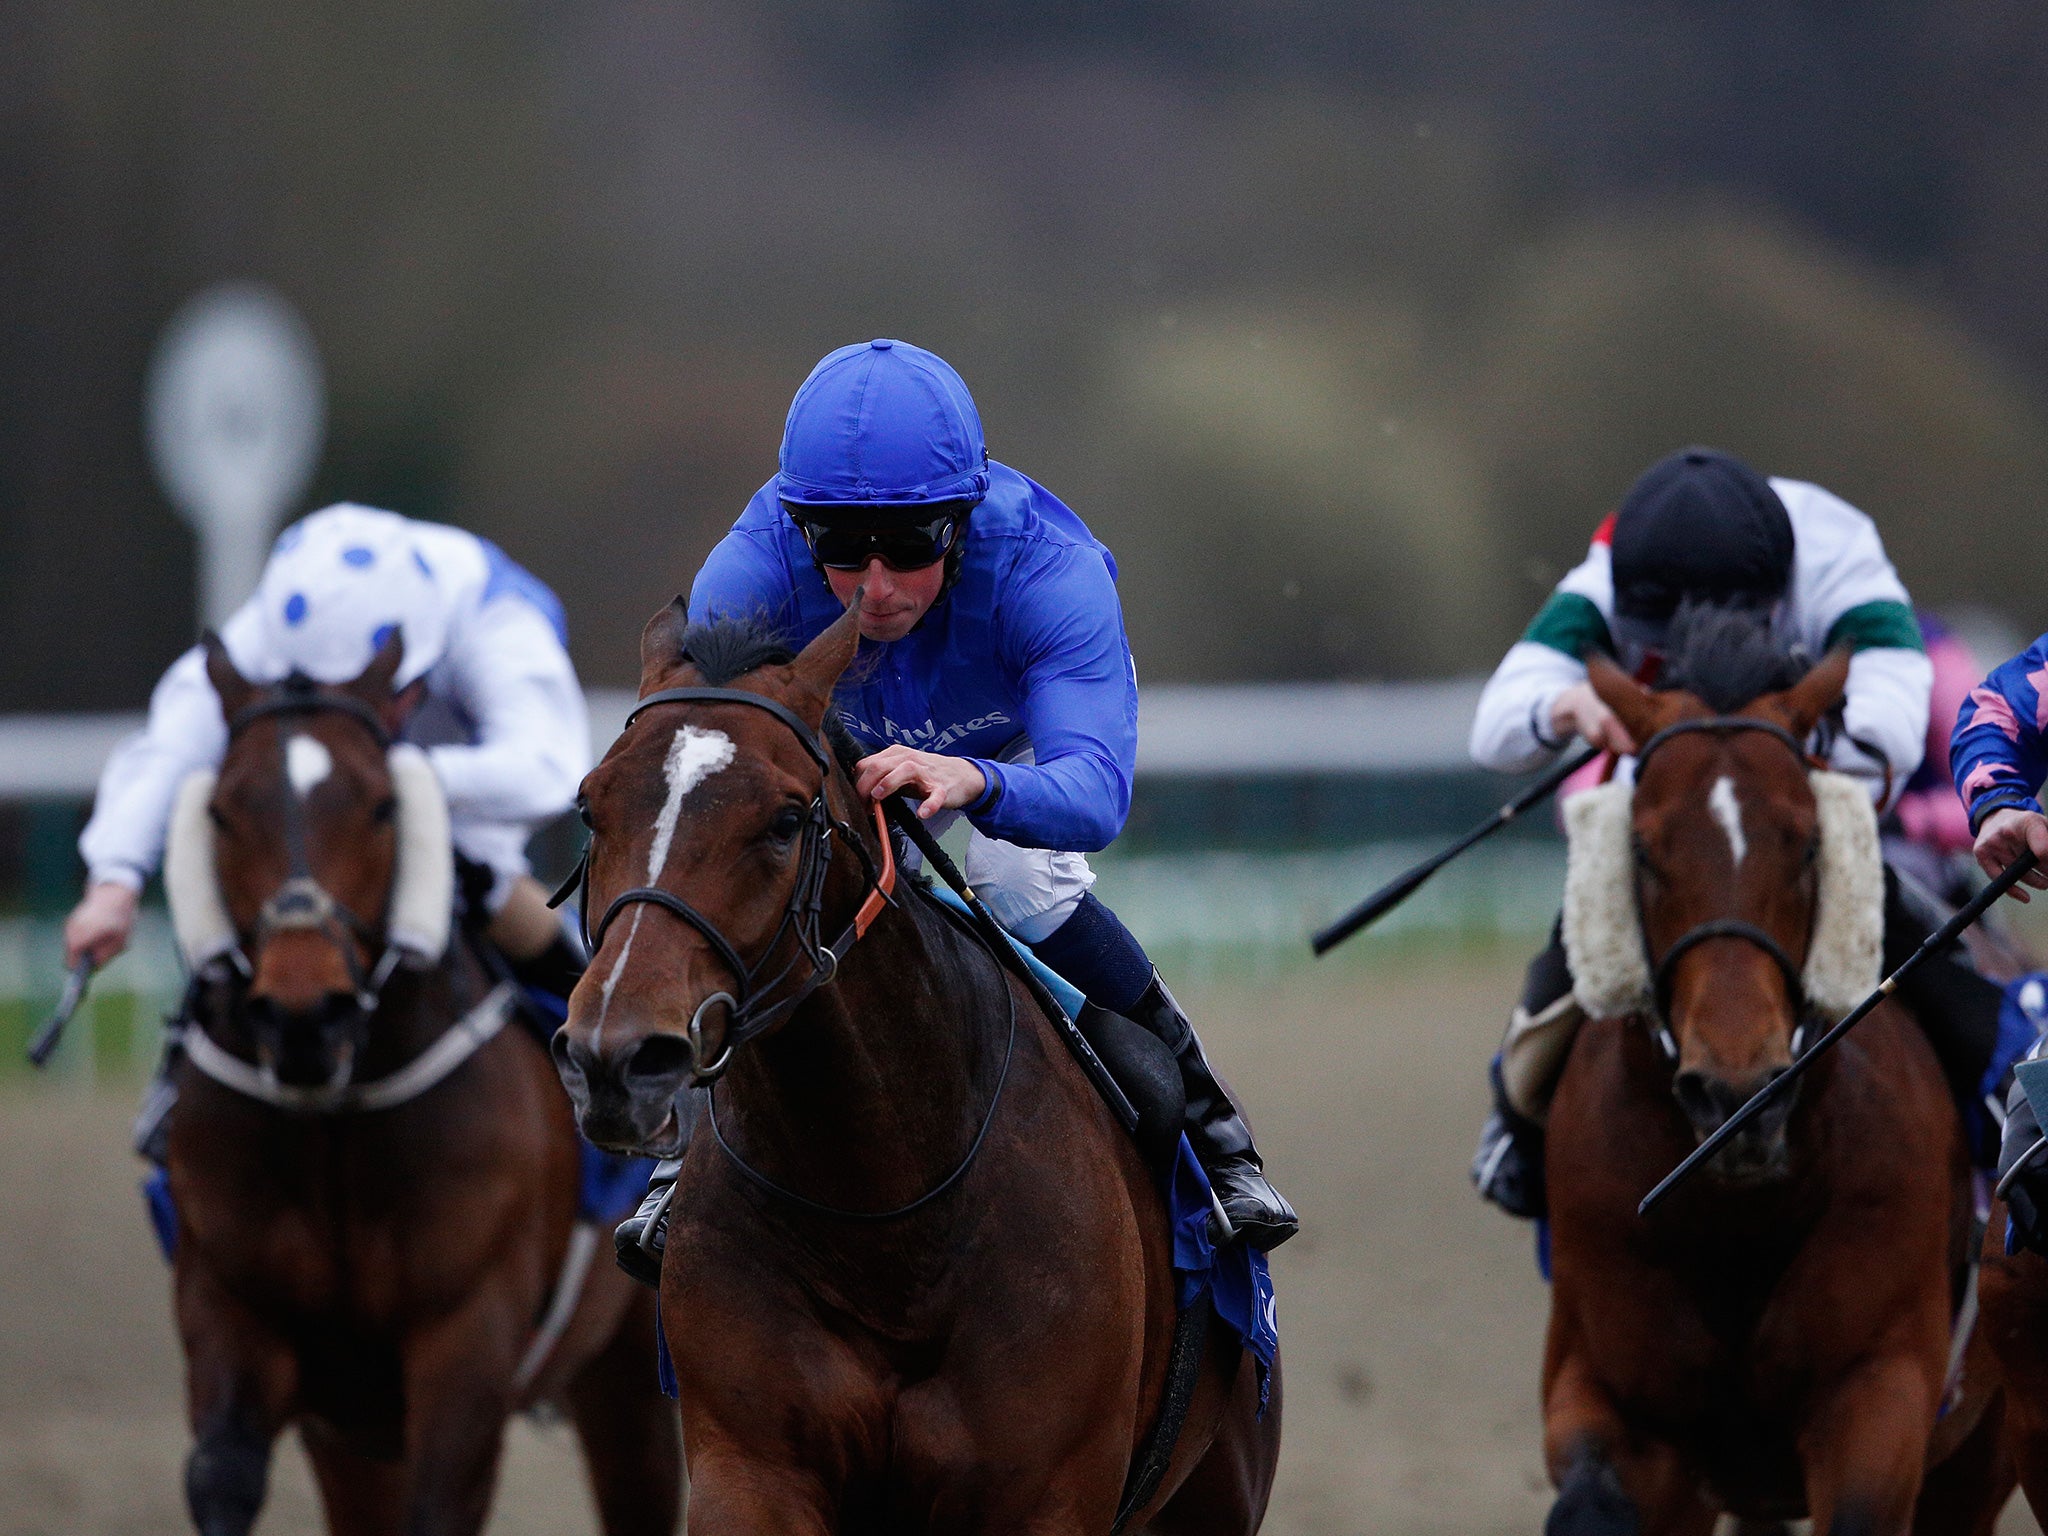 William Buick swoops aboard Tryster to win the Easter Classic for Godolphin, who dominated the fixture at Lingfield